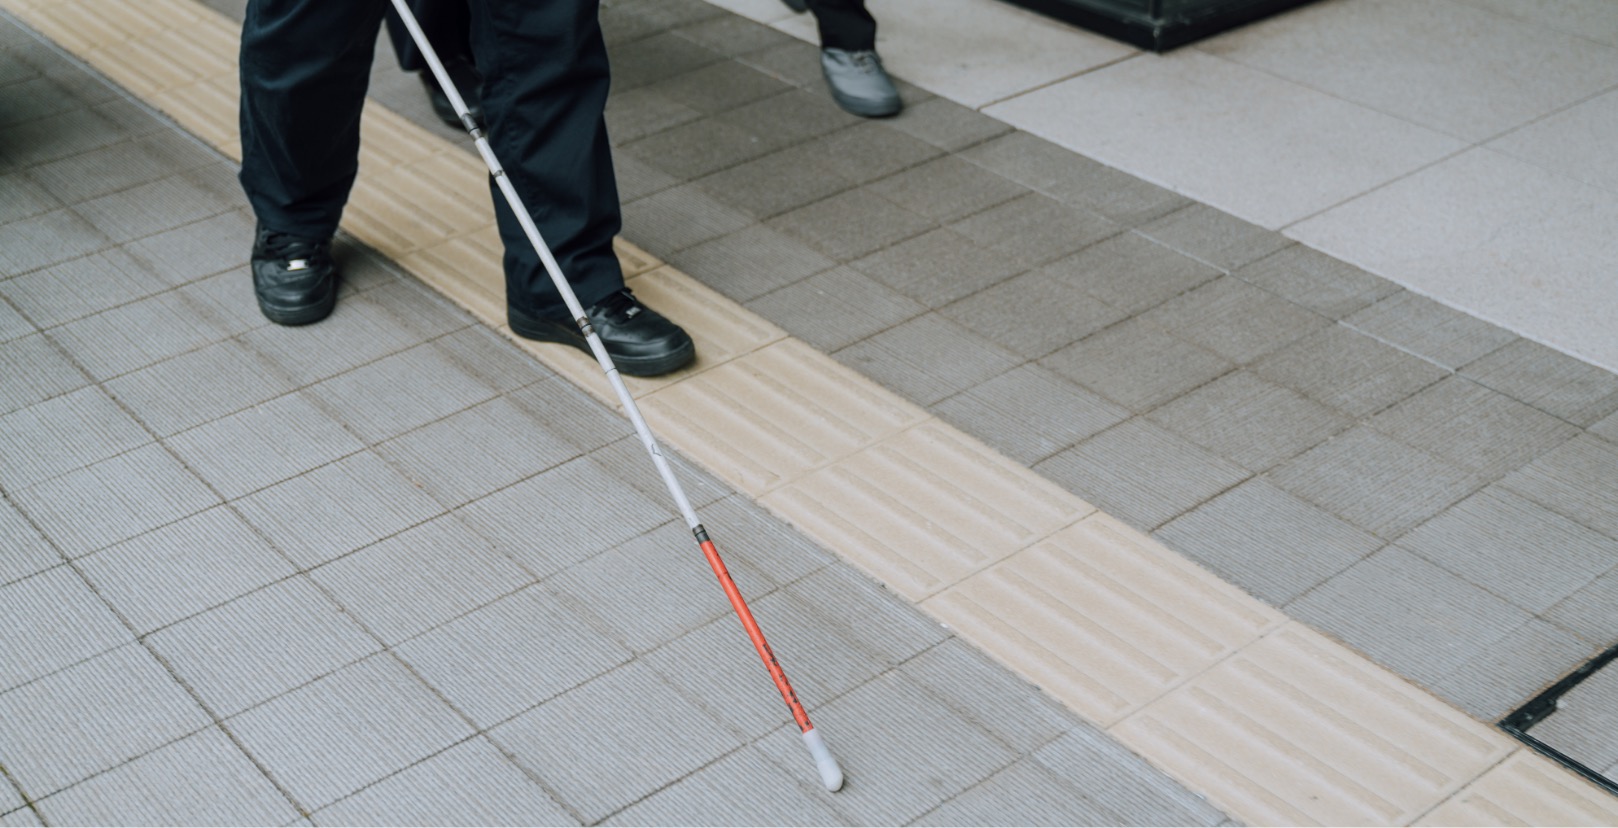 A picture of feet working on the yellow tiled floor, with a white cane.